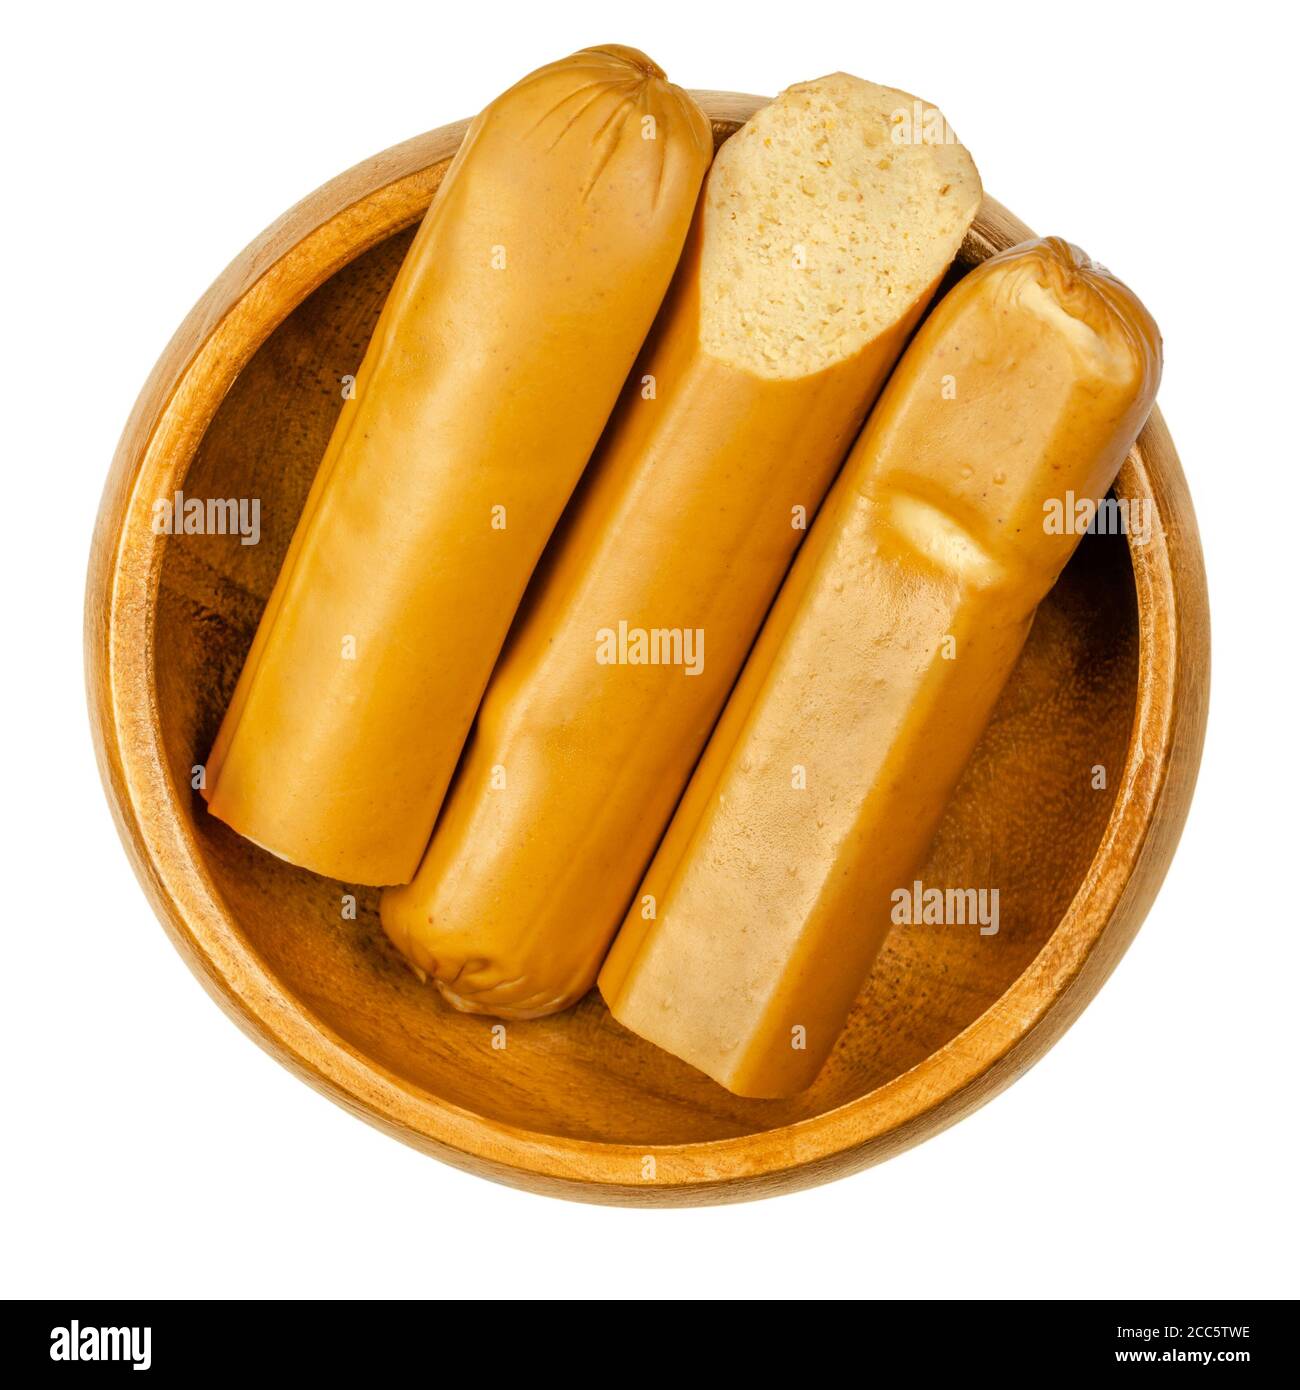 Vegan Vienna sausages in wooden bowl. Thin parboiled sausages, made of tofu then given a low temperature smoking. Also called Wiener or Frankfurter. Stock Photo